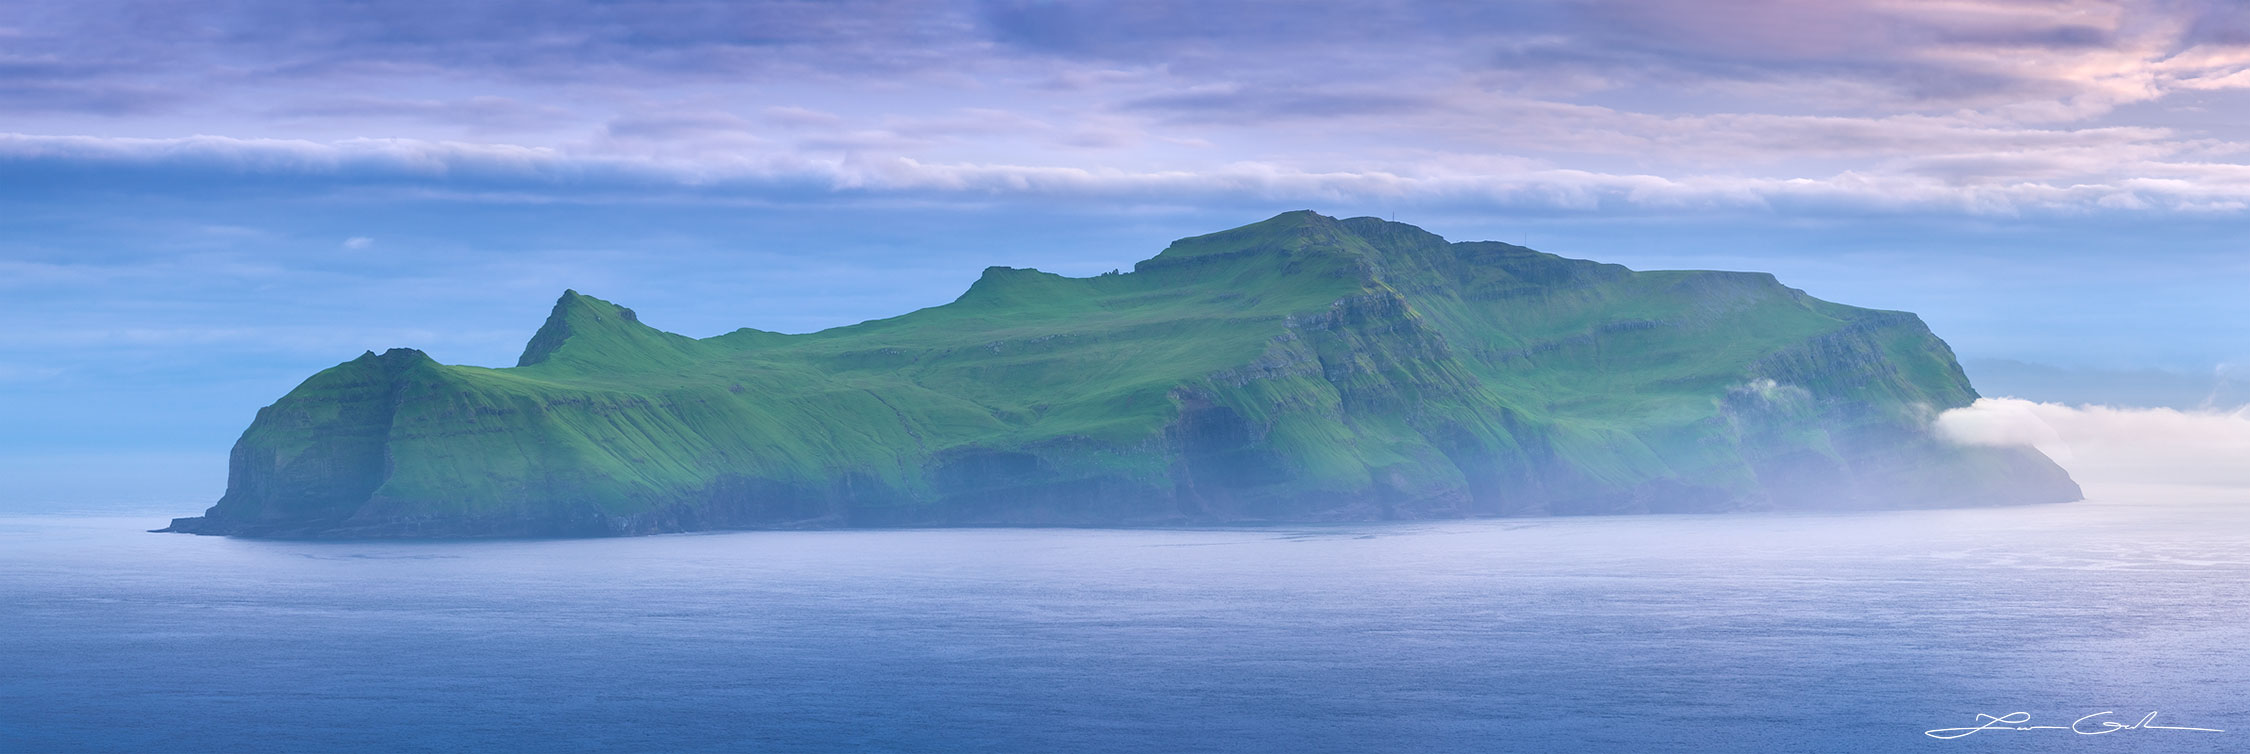 an evening panorama of a long island with some mist and clouds around - Faroe Islands - Gintchin Fine Art